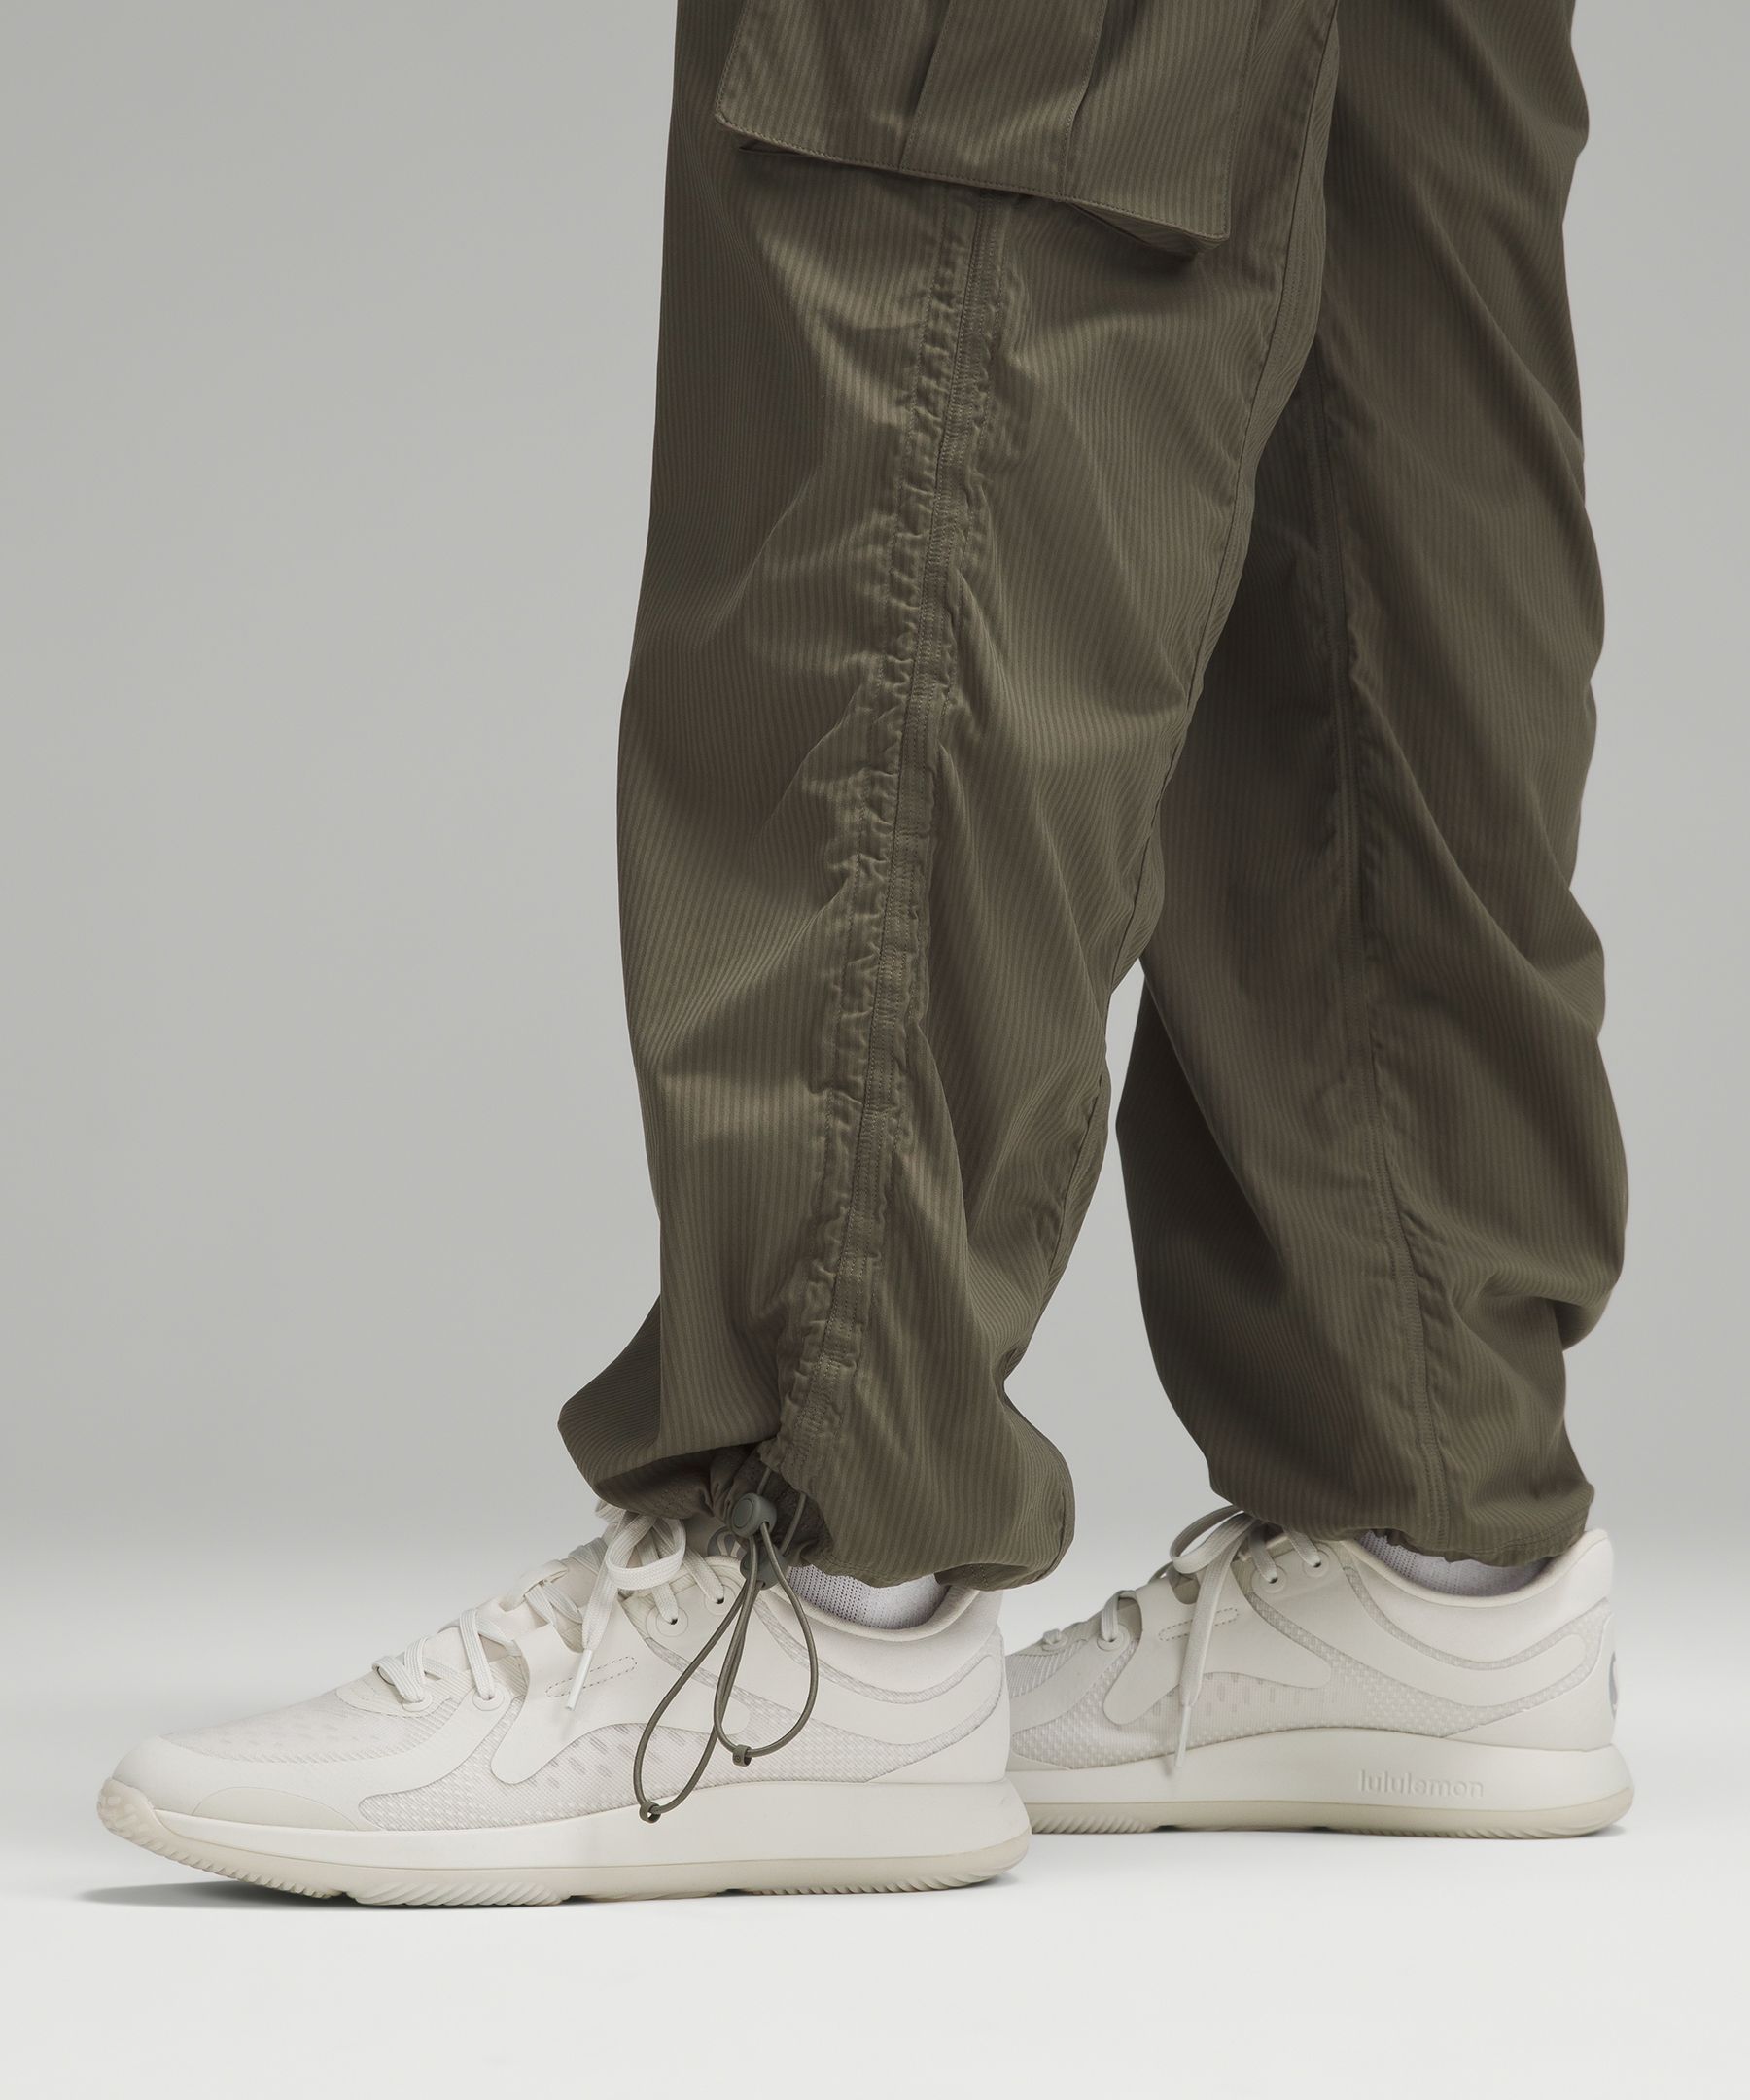 Dance Studio Relaxed-fit Mid-rise Cargo Pants